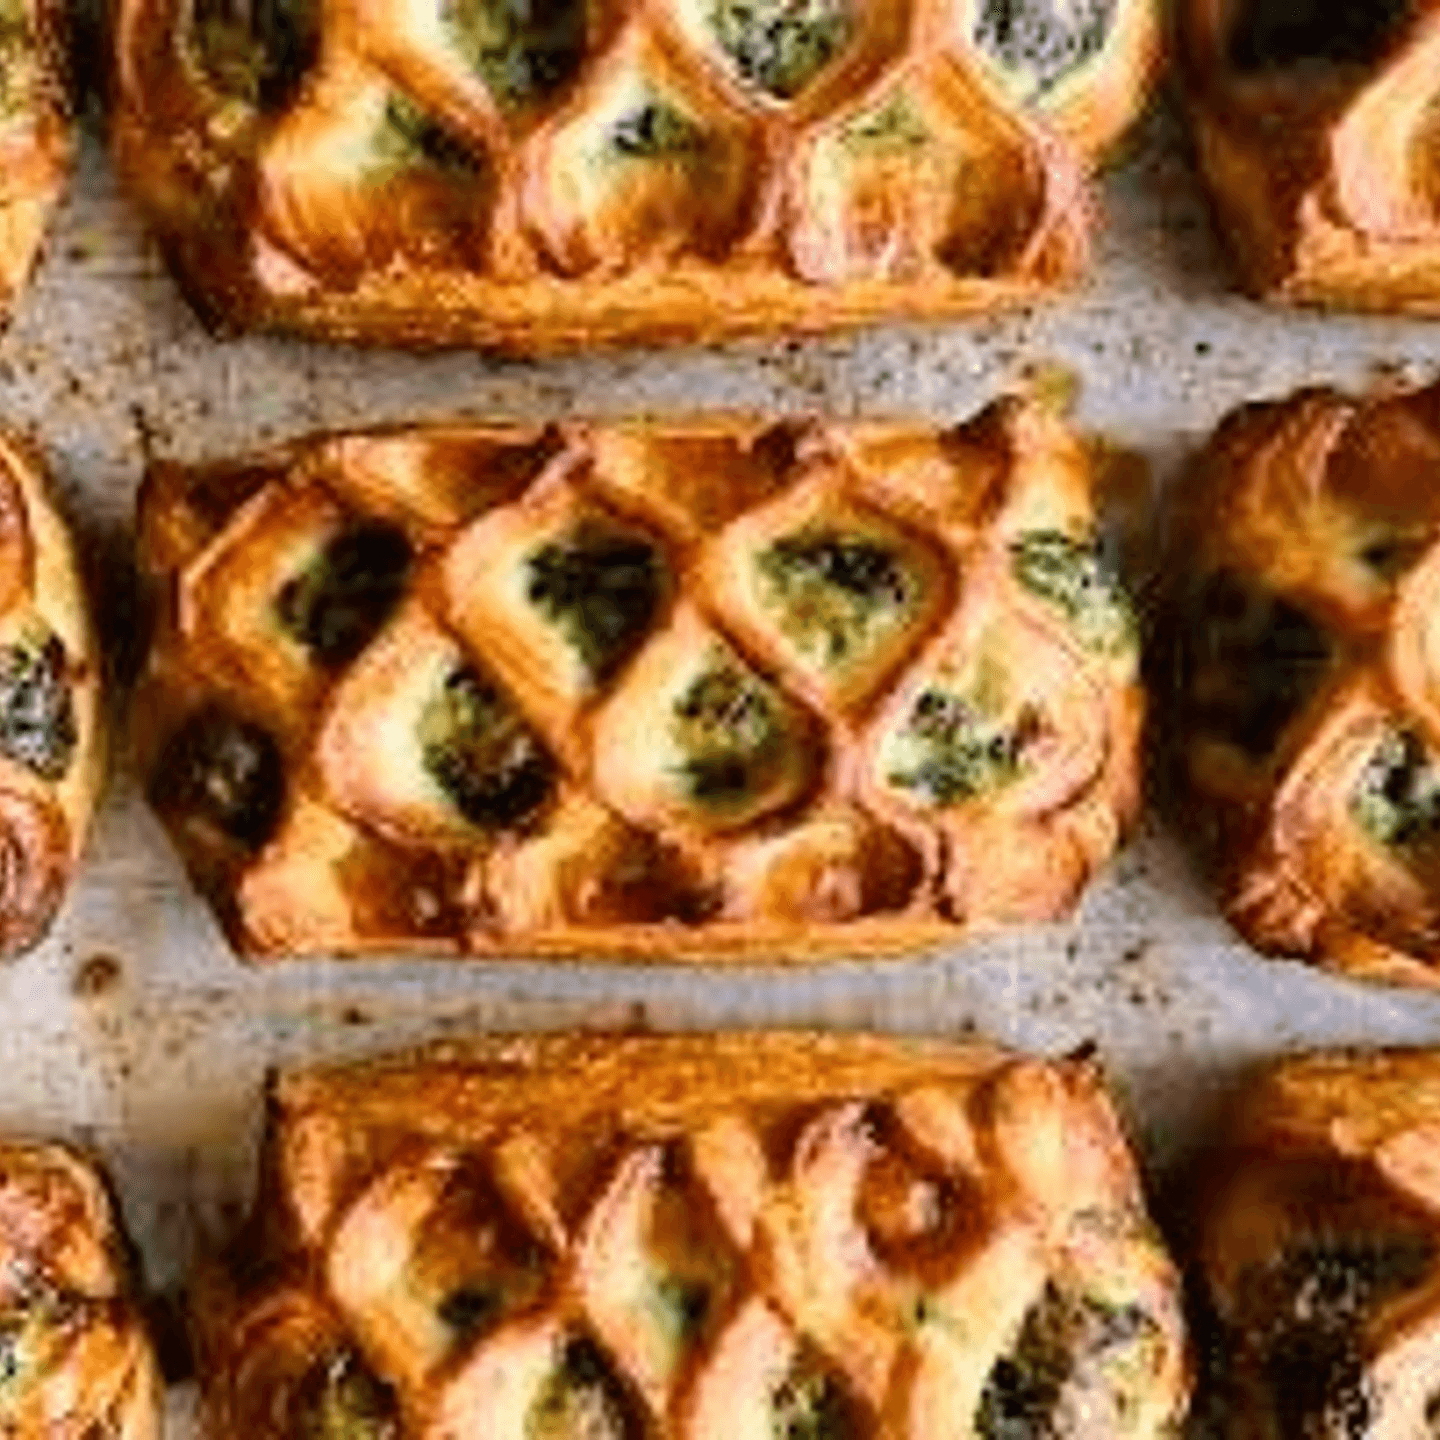 Spinach & Feta: Our Daily Baked Goods